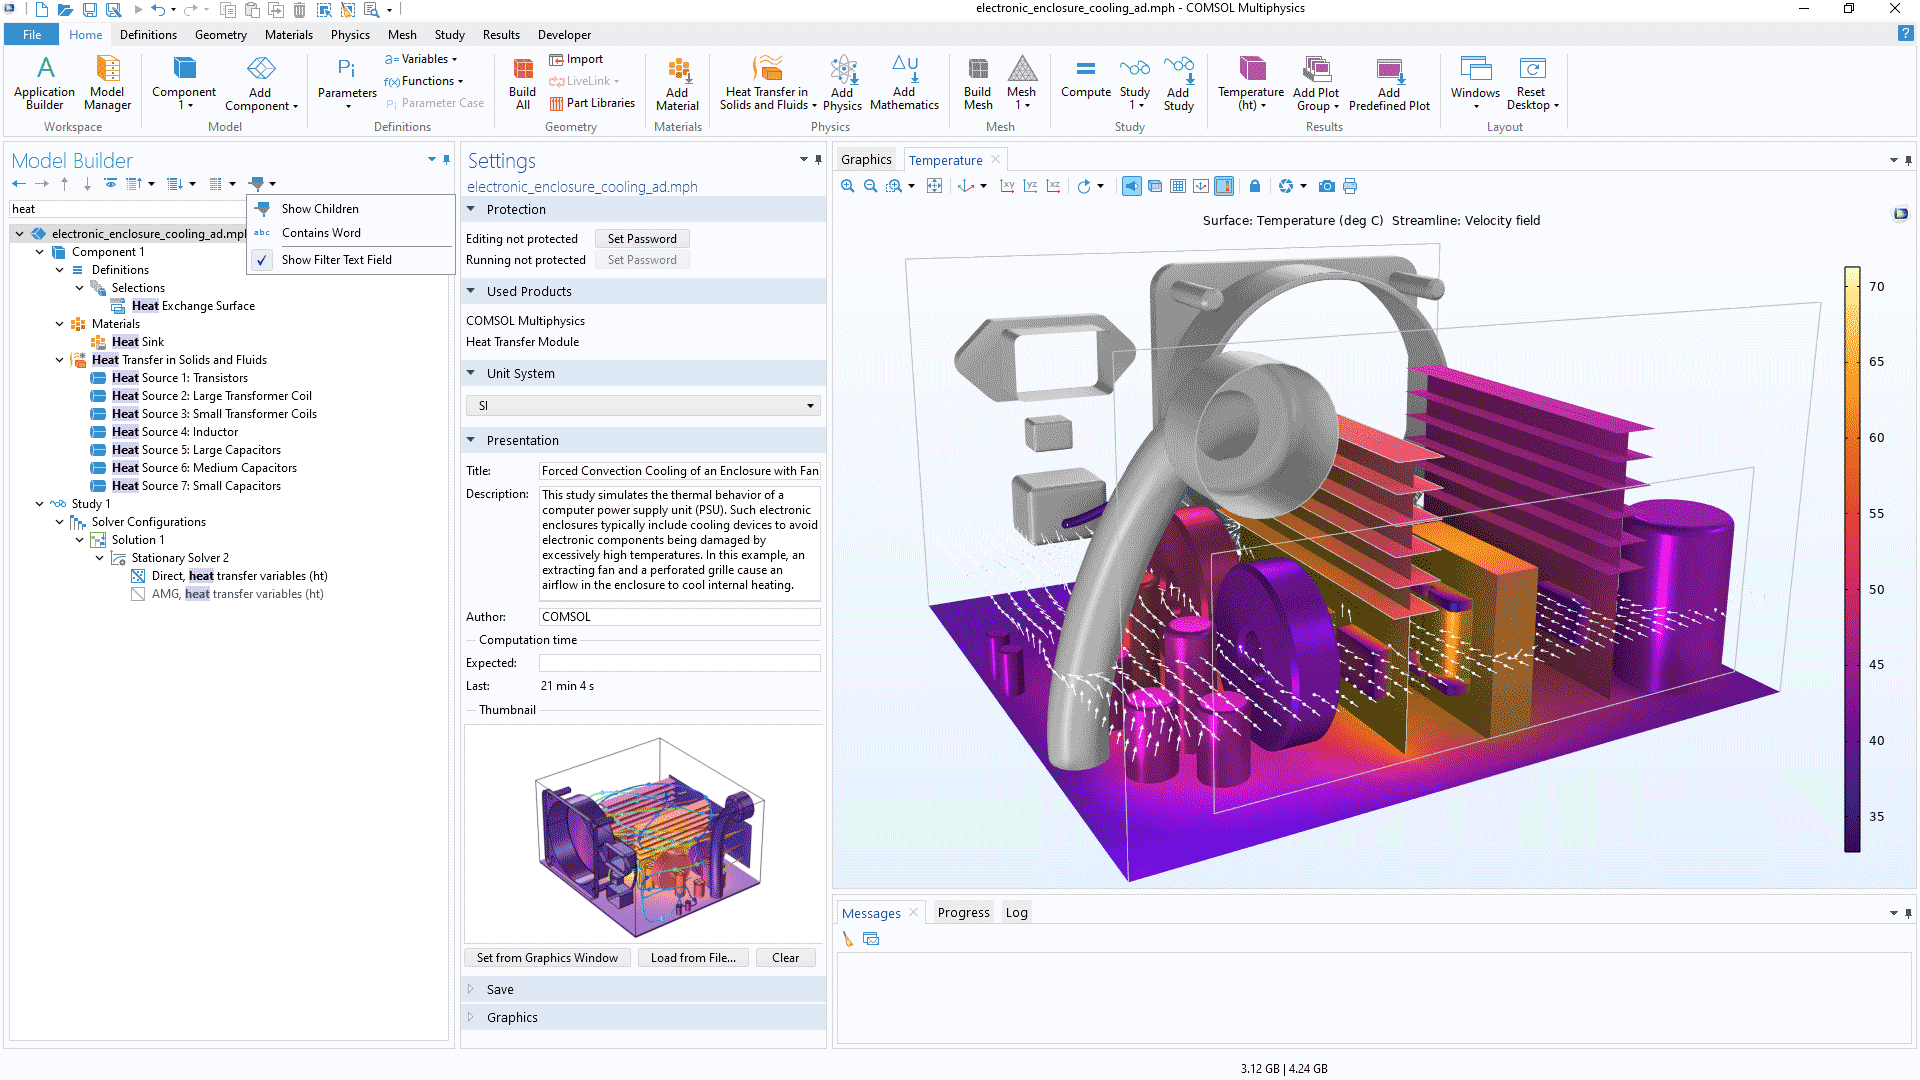 The COMSOL Multiphysics UI with the term "heat" typed into the Model Builder filter text field and the corresponding heat nodes highlighted within the model tree.